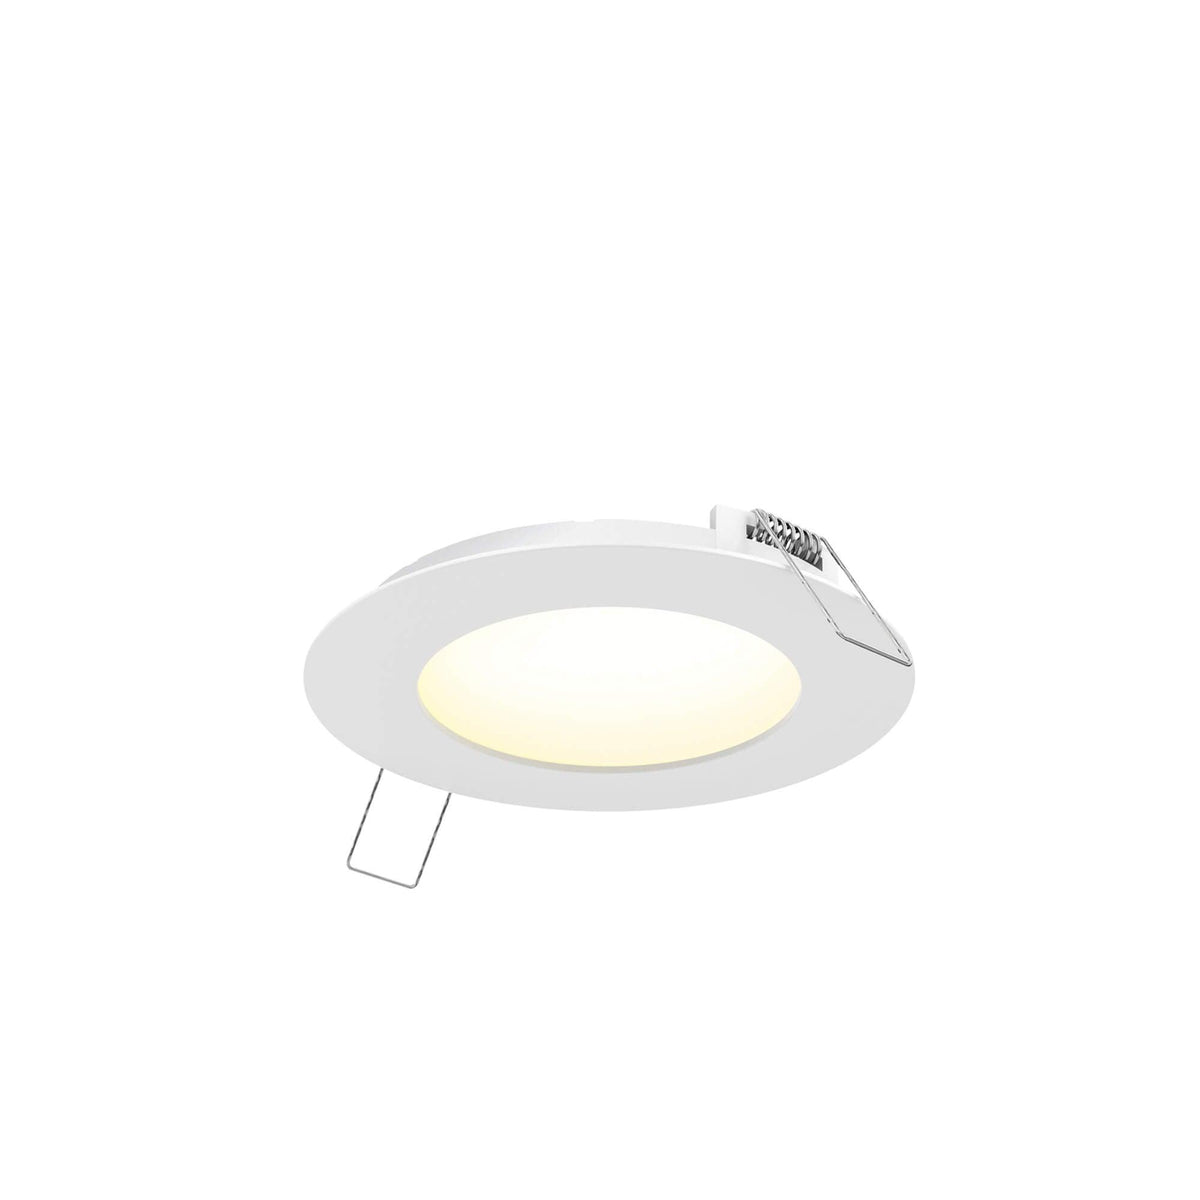 Dals Lighting - 5000 Series 5 Inch Round CCT LED Recessed Panel Light - 5005-CC-WH | Montreal Lighting & Hardware